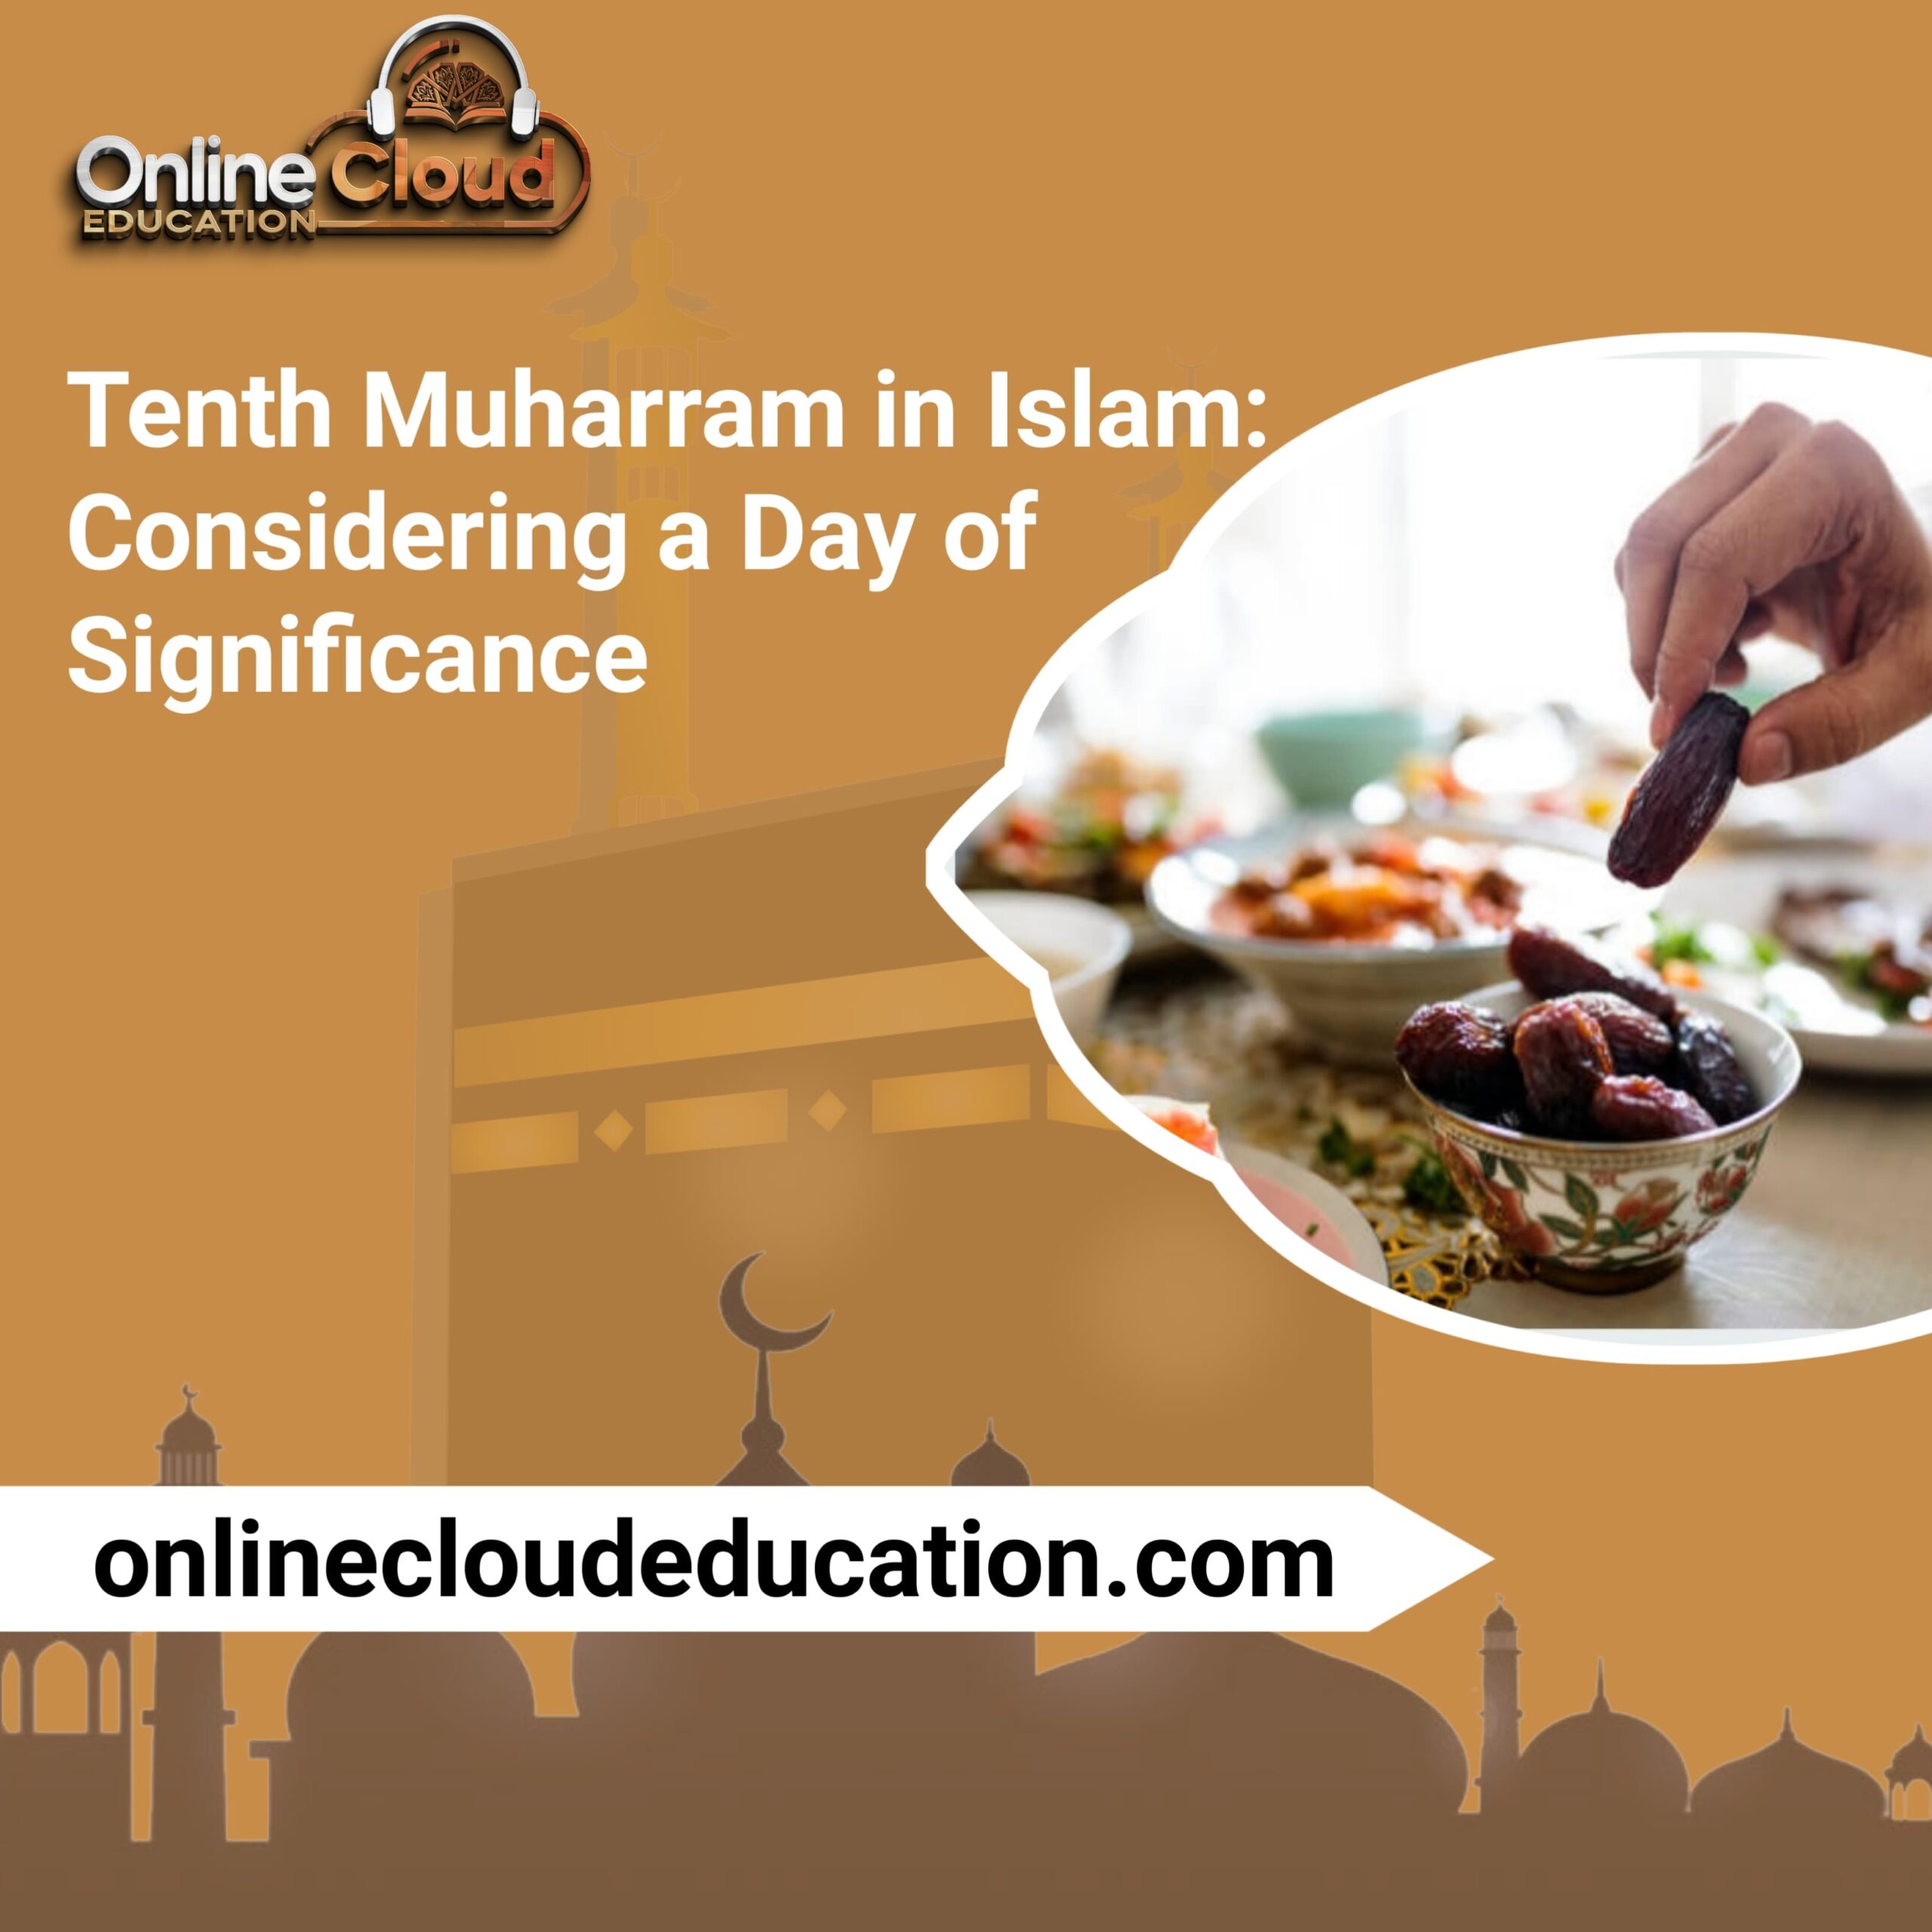 Tenth Muharram in Islam: Considering a Day of Significance